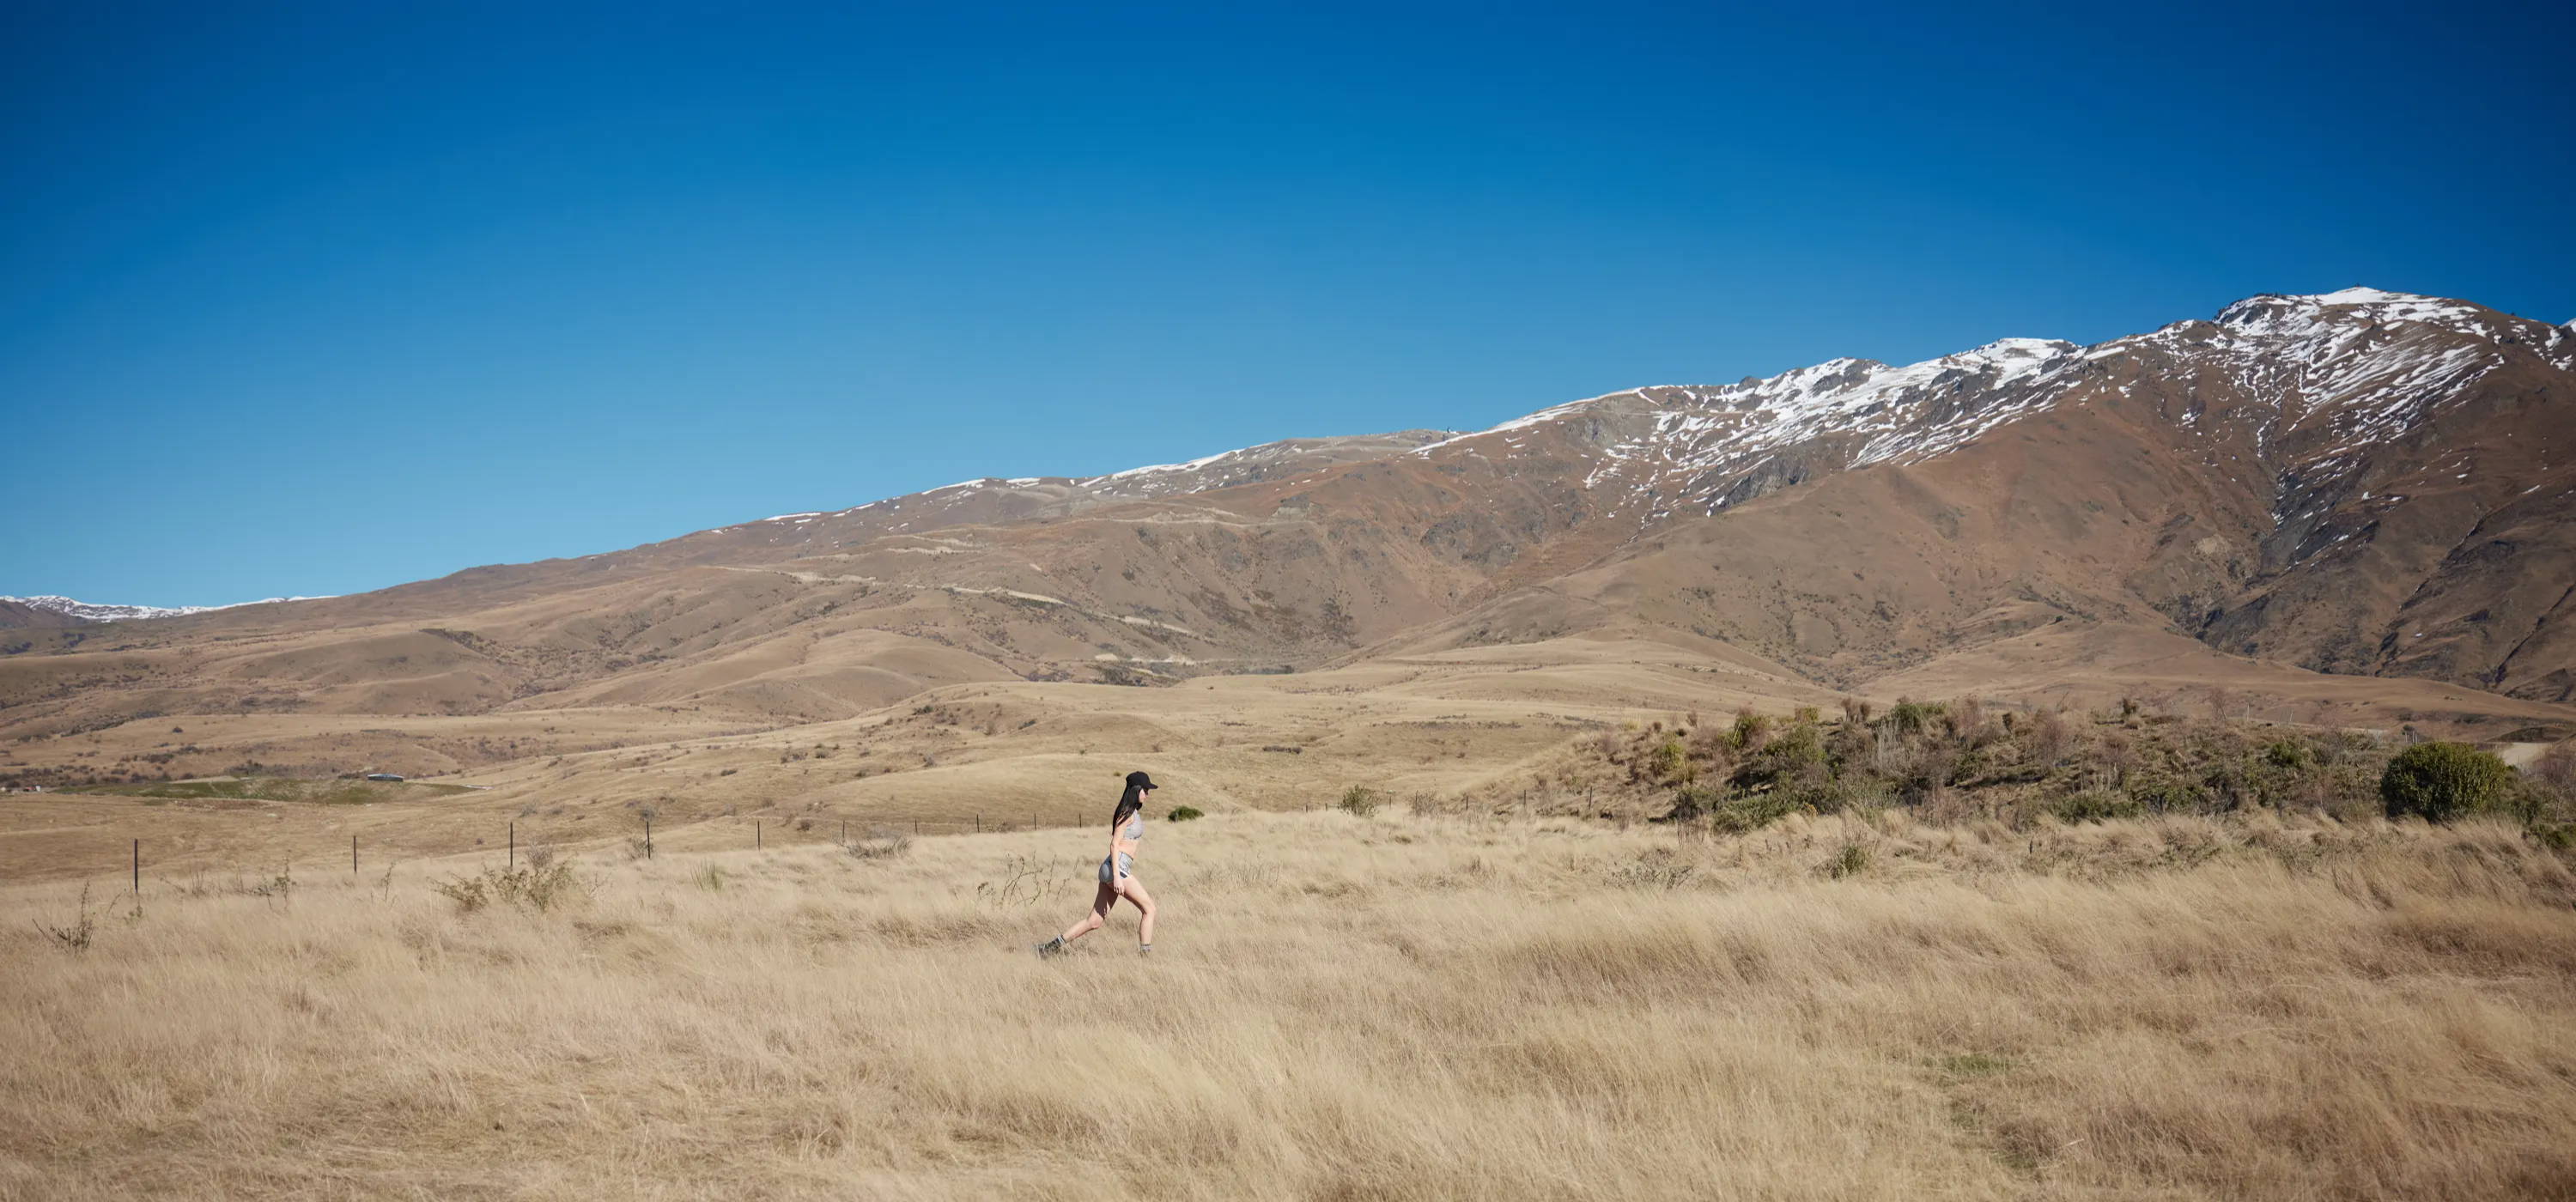 Girl walking through the wilderness, with snow-capped peaks in the background